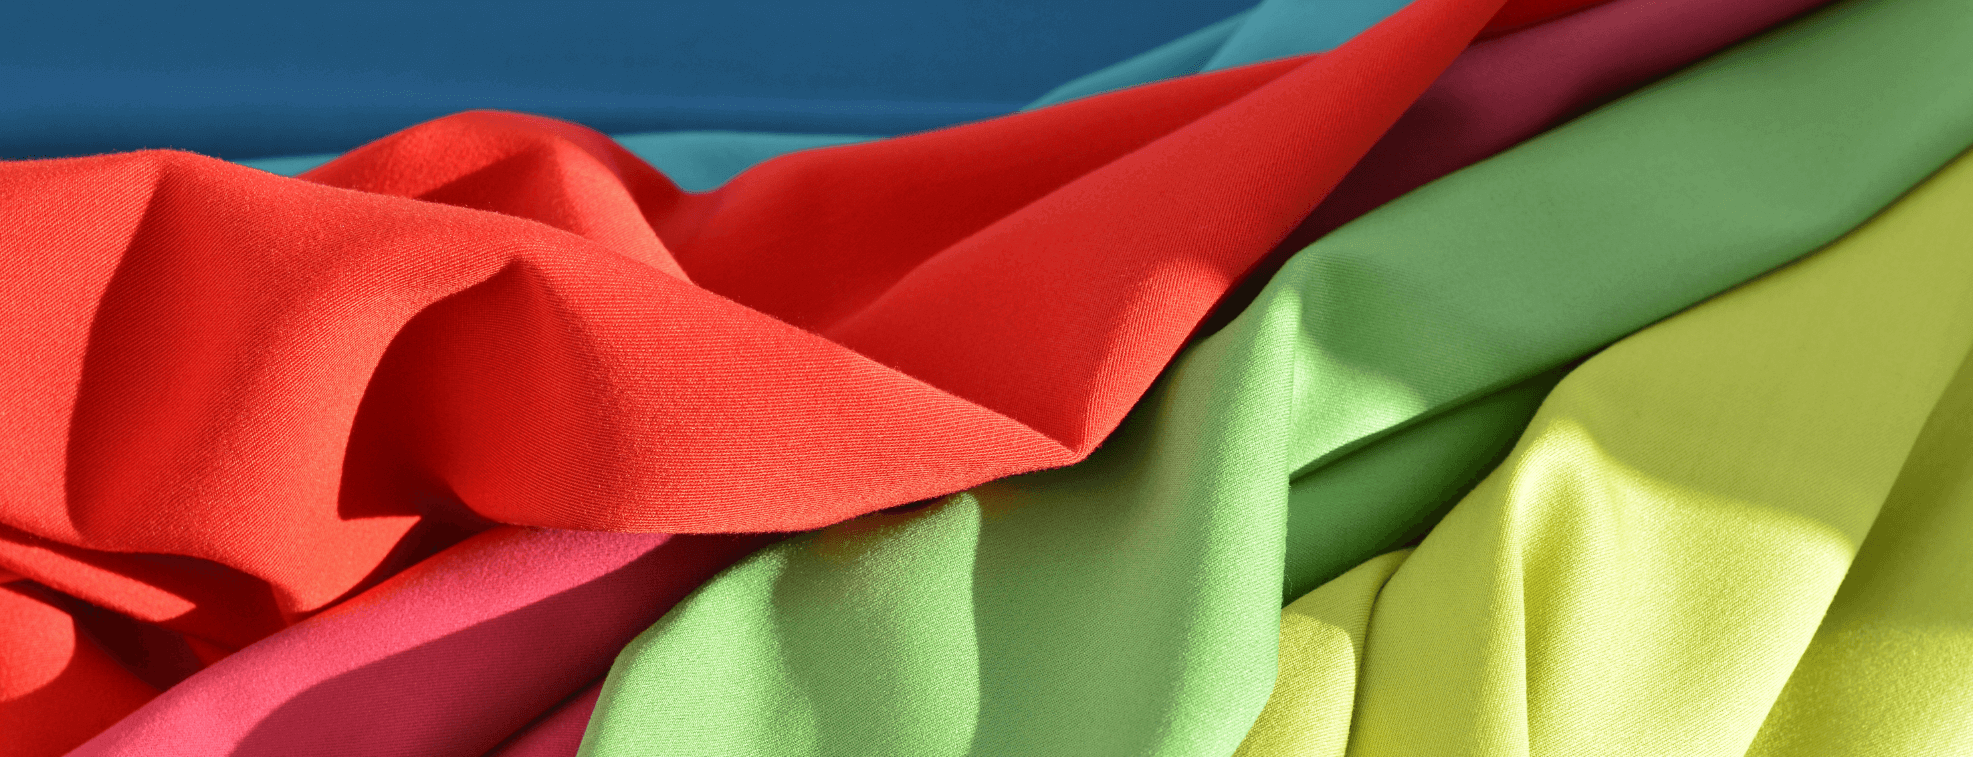 Bright synthetic fabrics of different colored placed over each other